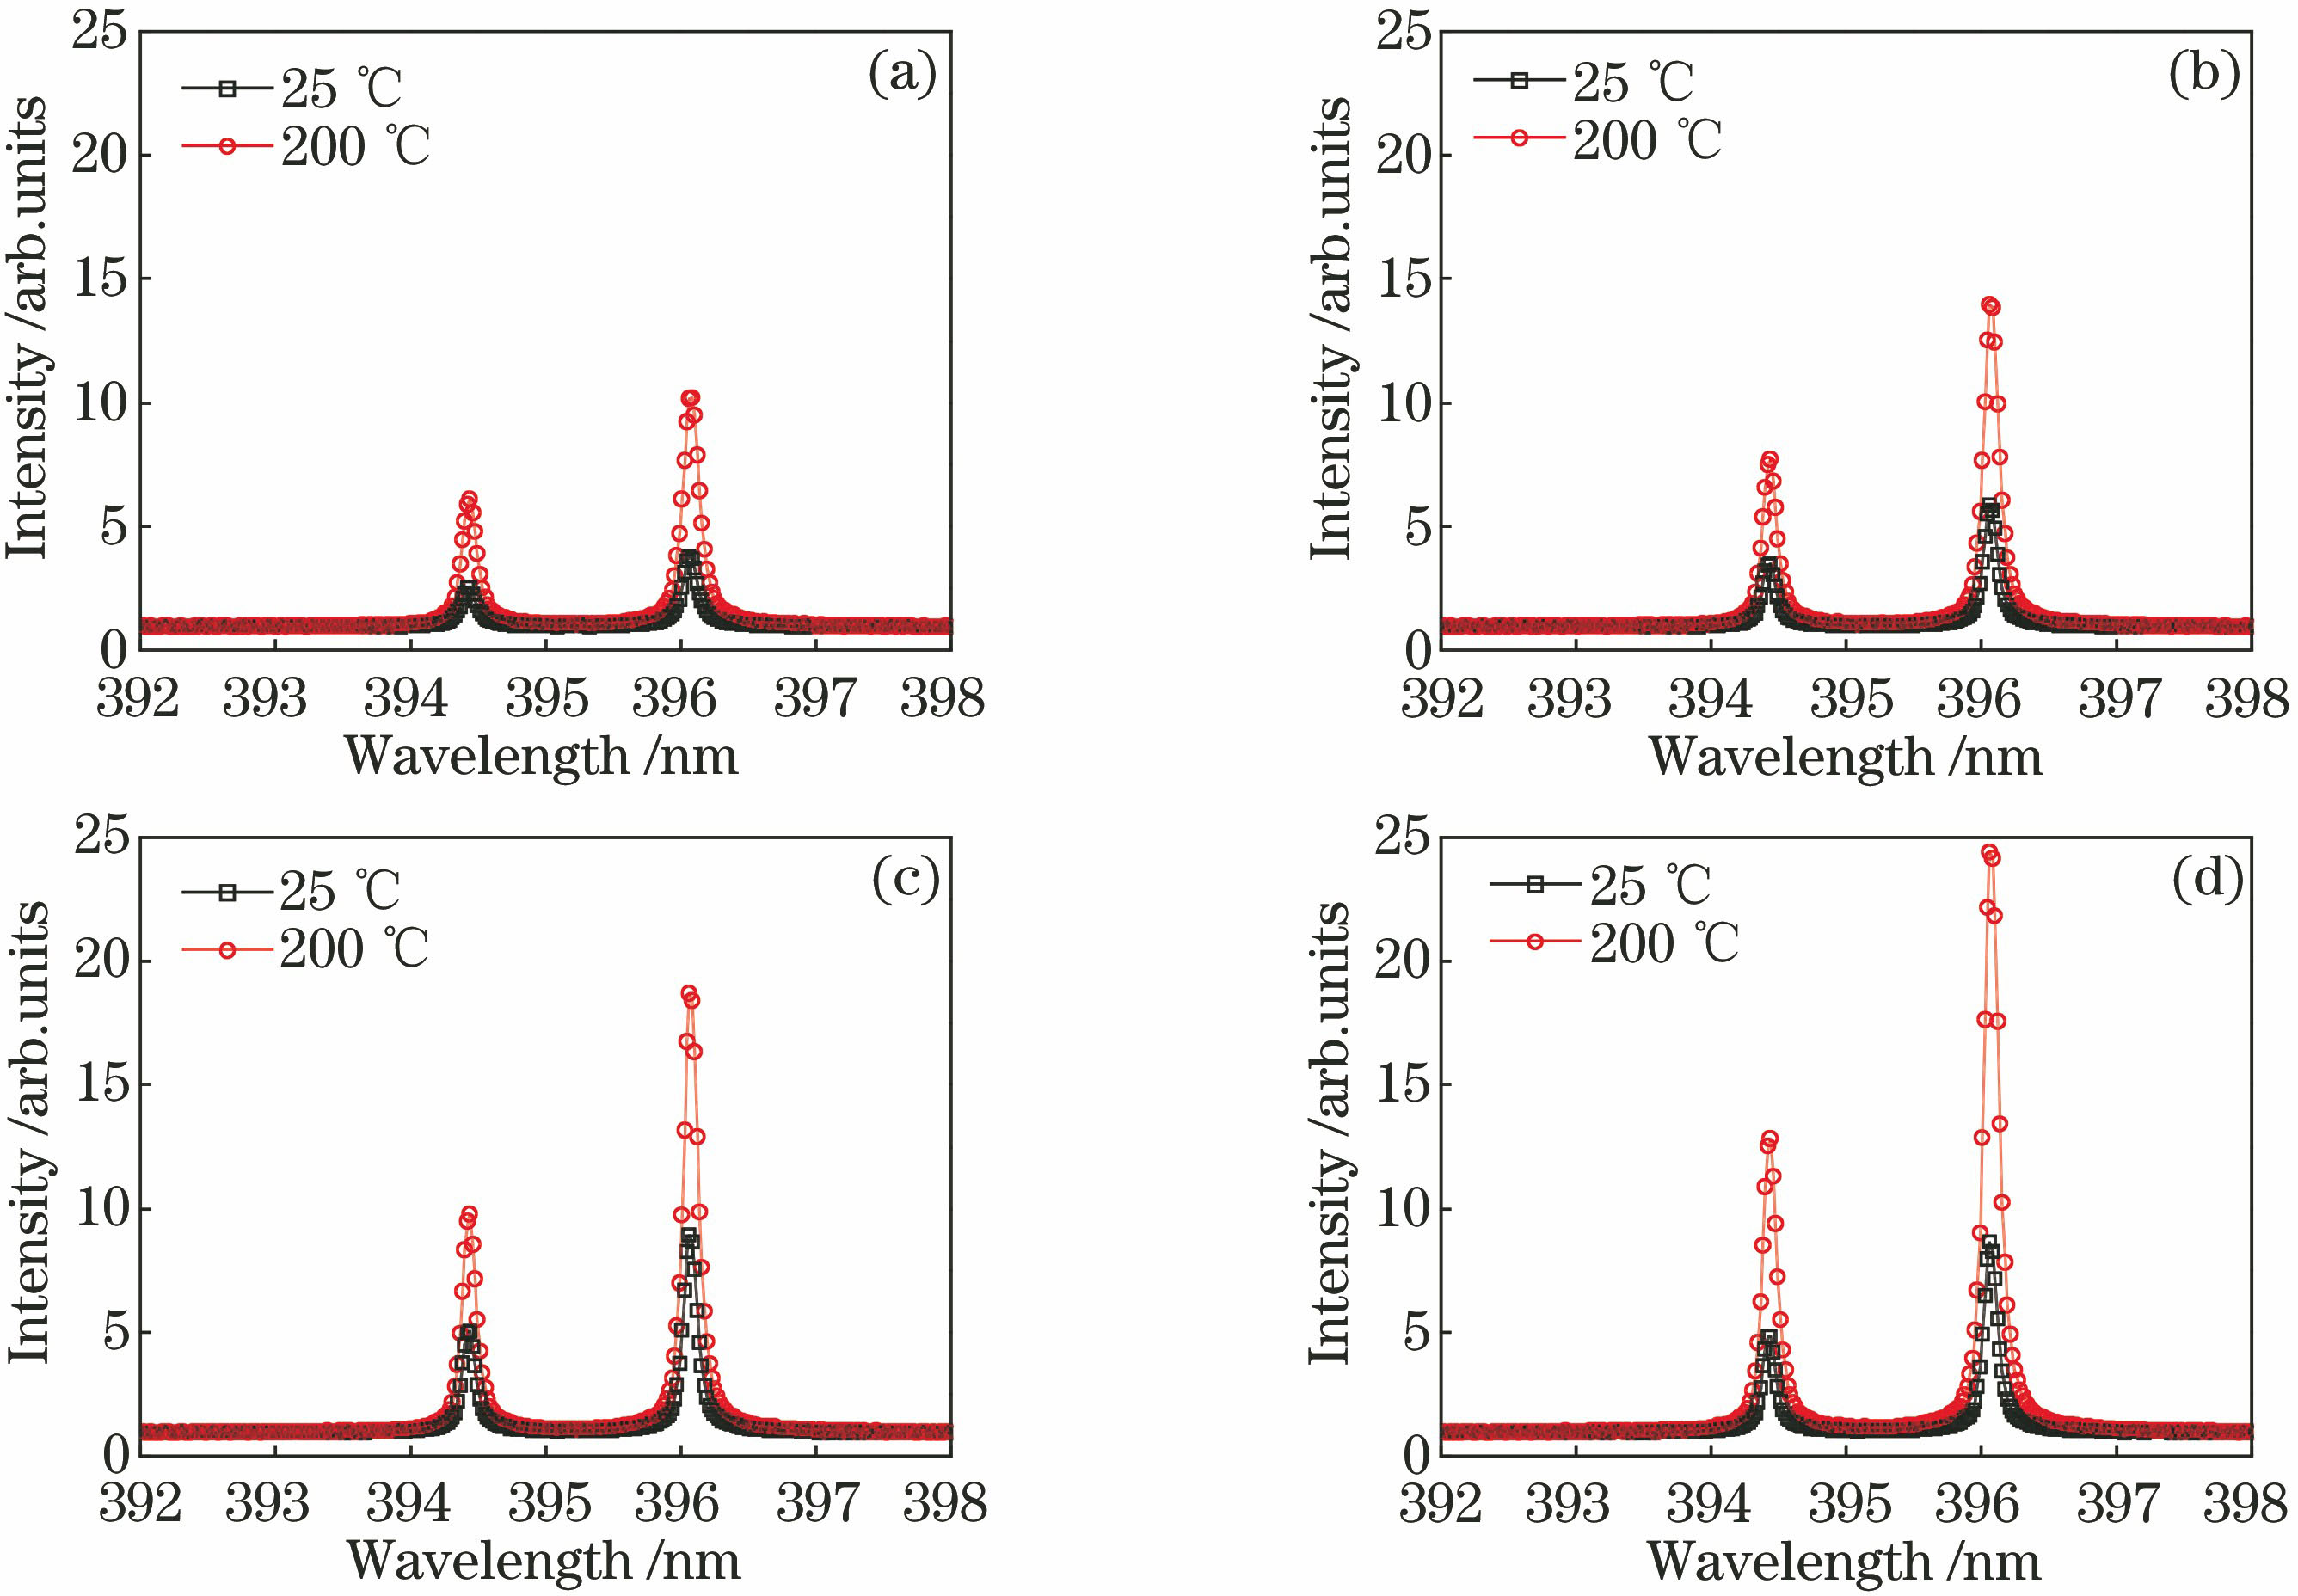 Spectral intensity of aluminum plasma at different laser energies for 25 ℃ and 200 ℃ sample temperatures. (a) 53.9 mJ; (b) 79.8 mJ; (c) 114.3 mJ; (d) 145.6 mJ